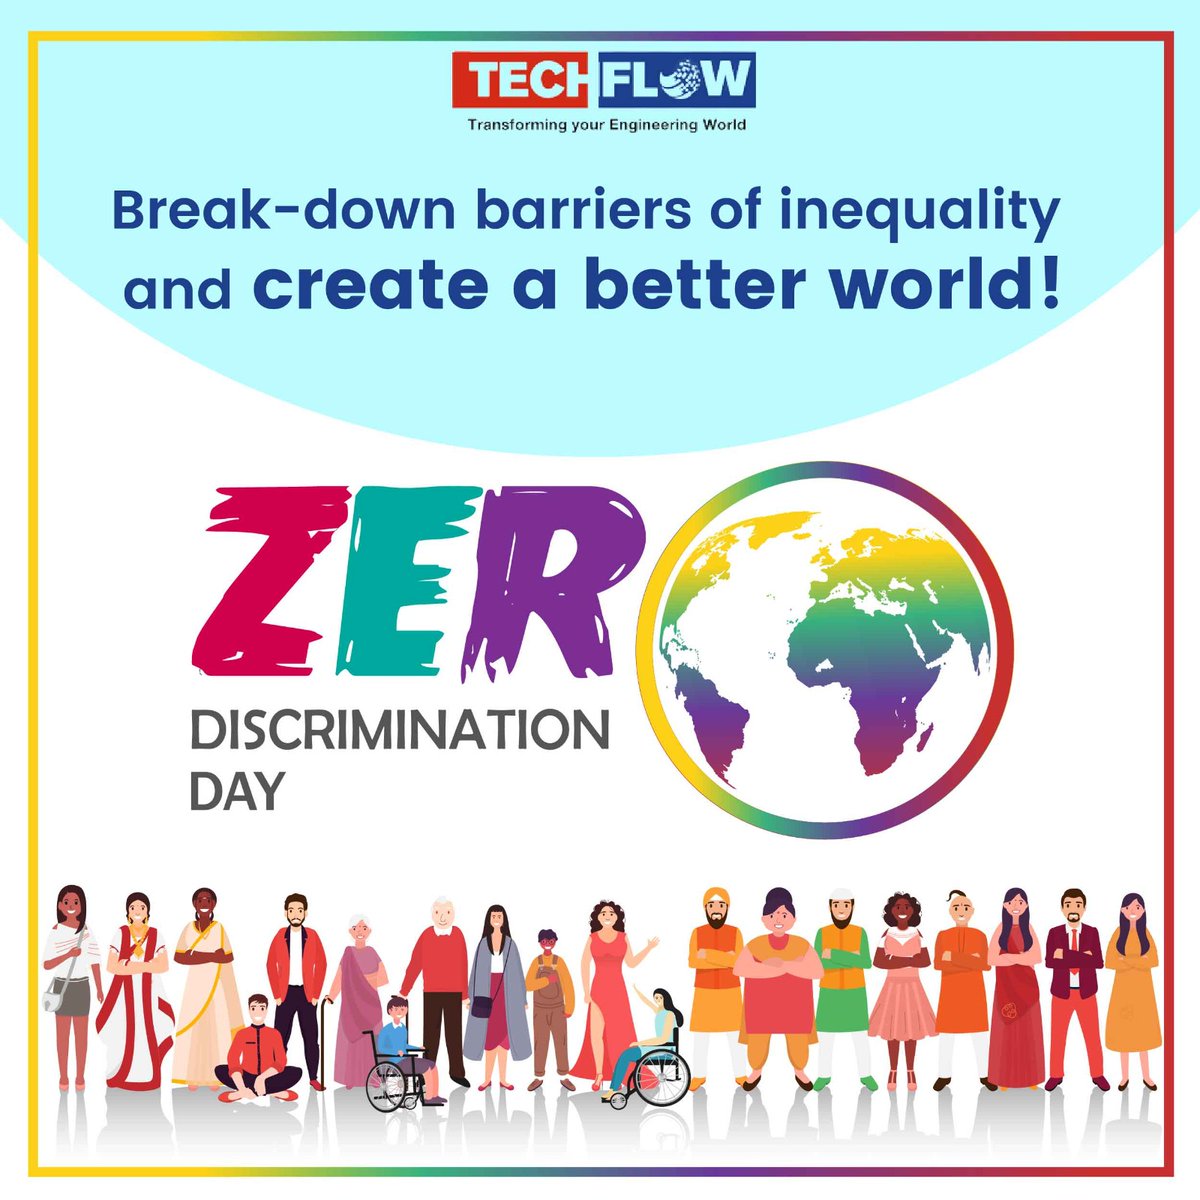 #Techflow values diversity and inclusivity, rejects discrimination, and strives to create a safe environment for all to thrive. #ZeroDiscriminationDay

#girlsrights #underprivileged   #savelivesdecriminalise #savelives #decriminalise #Steeldetailing #civilengineering